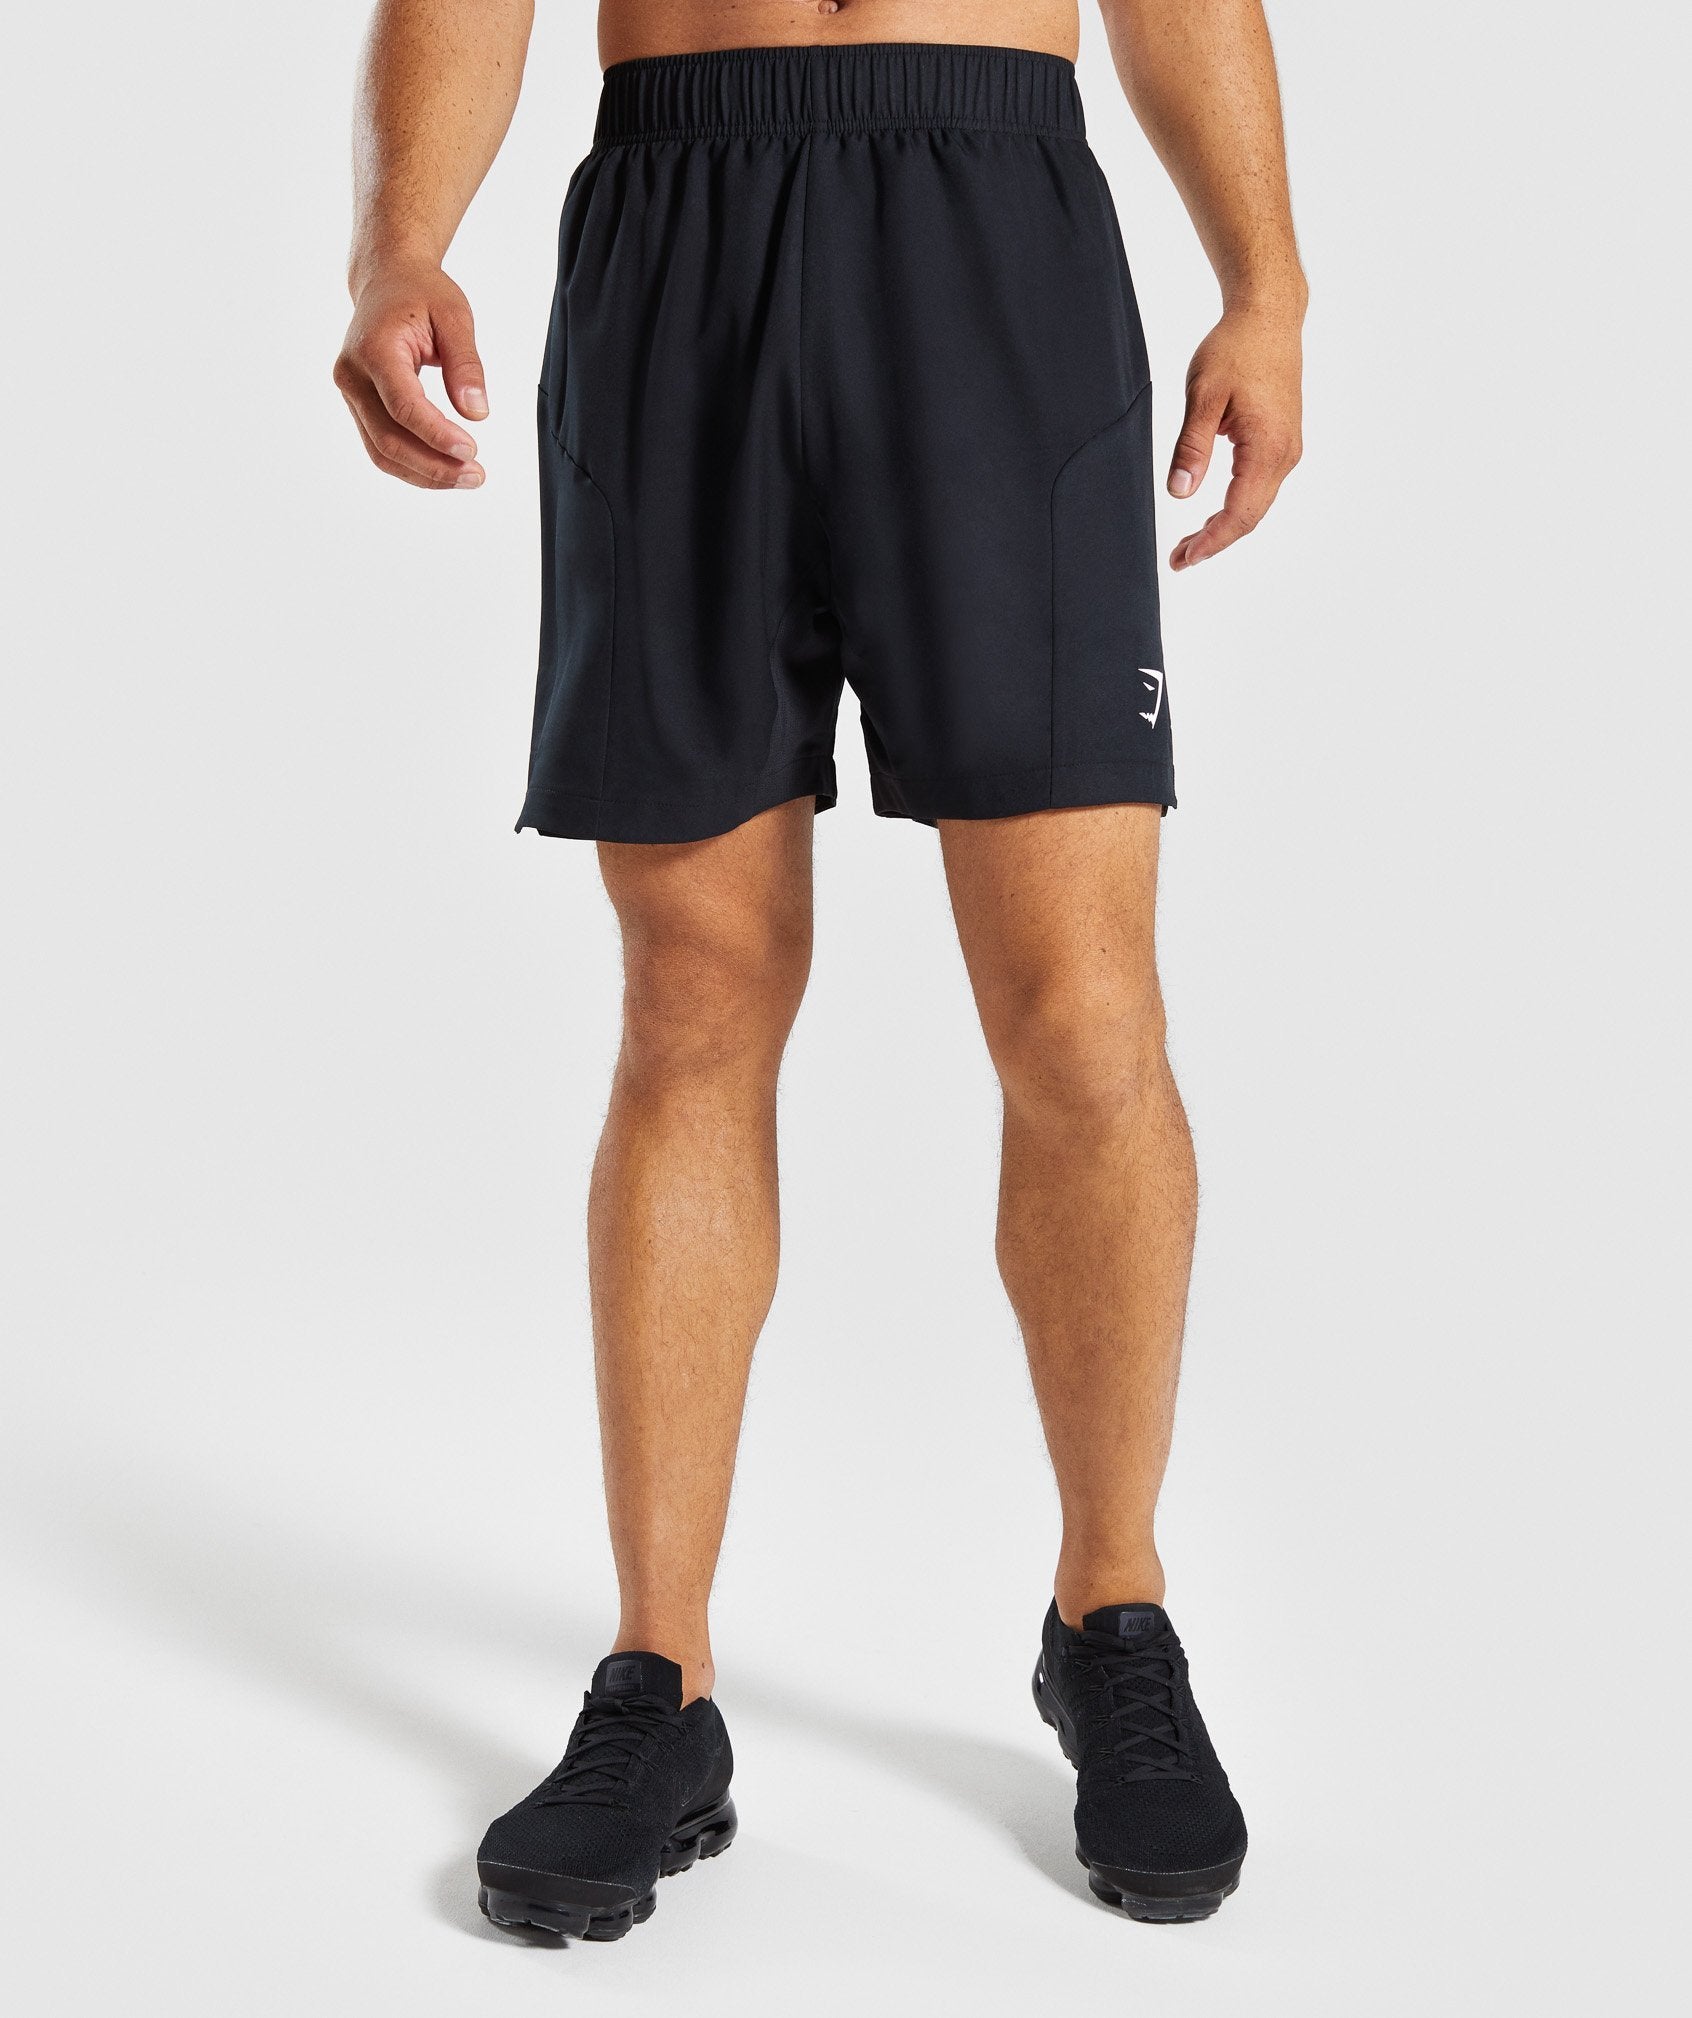 Primary Shorts in Black - view 1